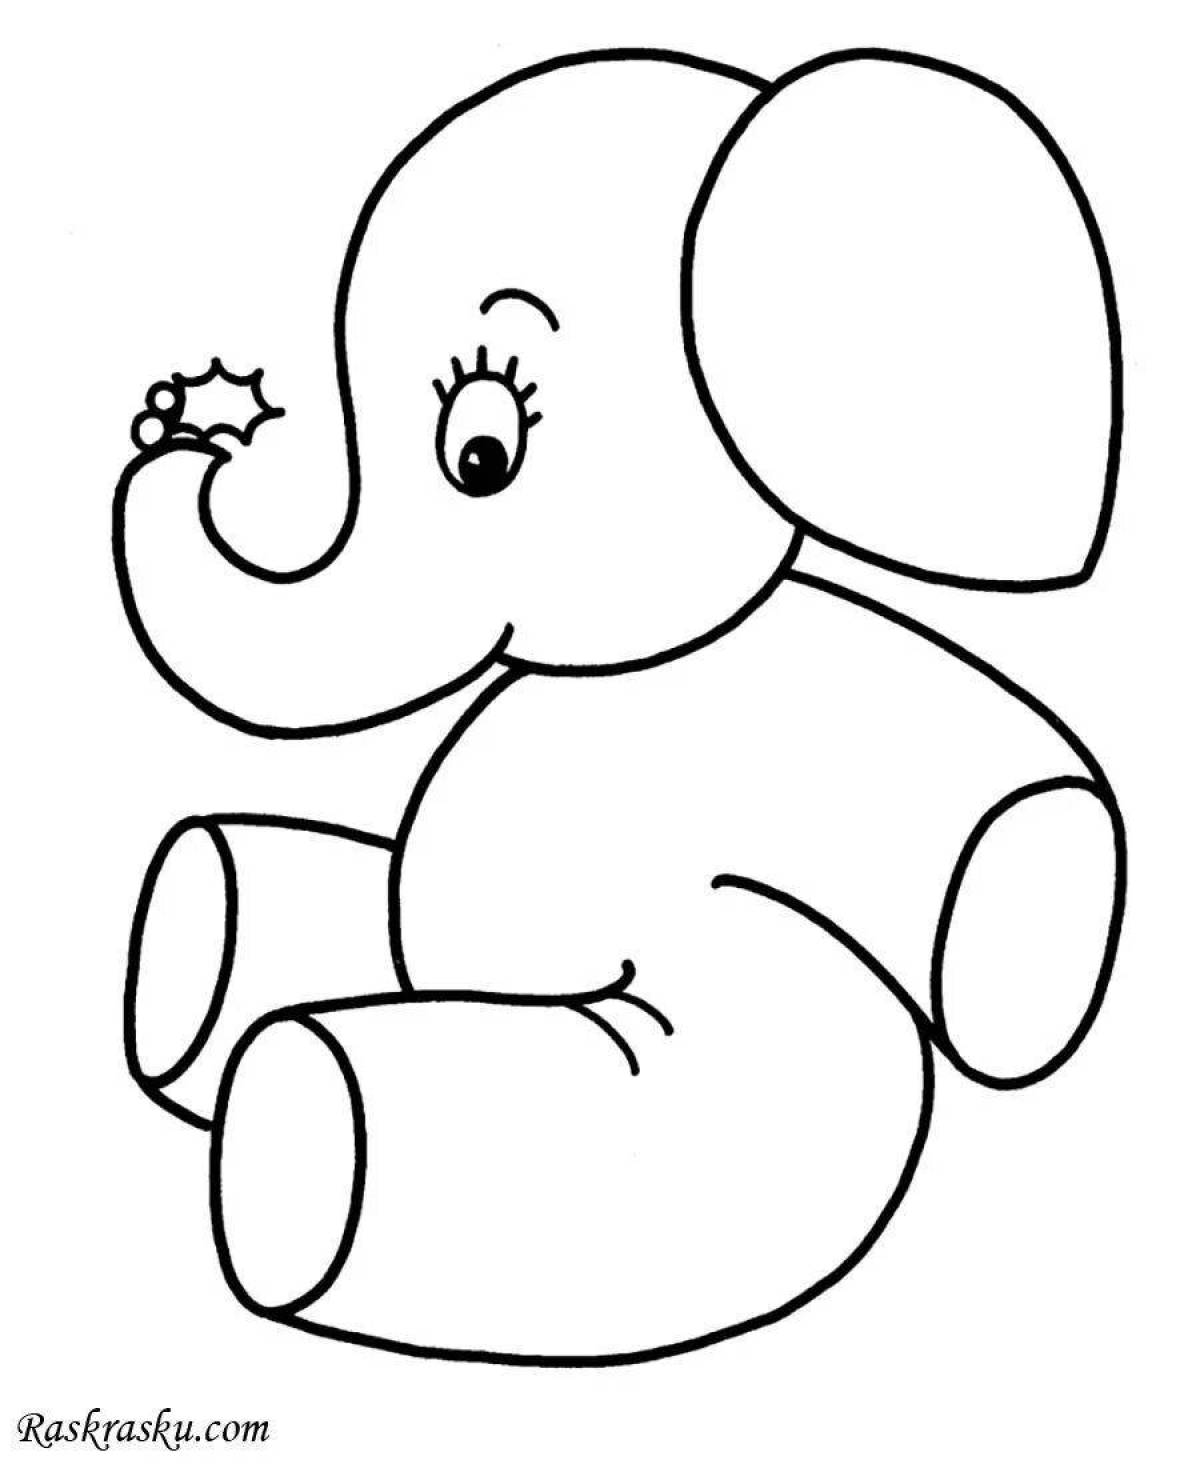 Fun coloring page 2 junior group